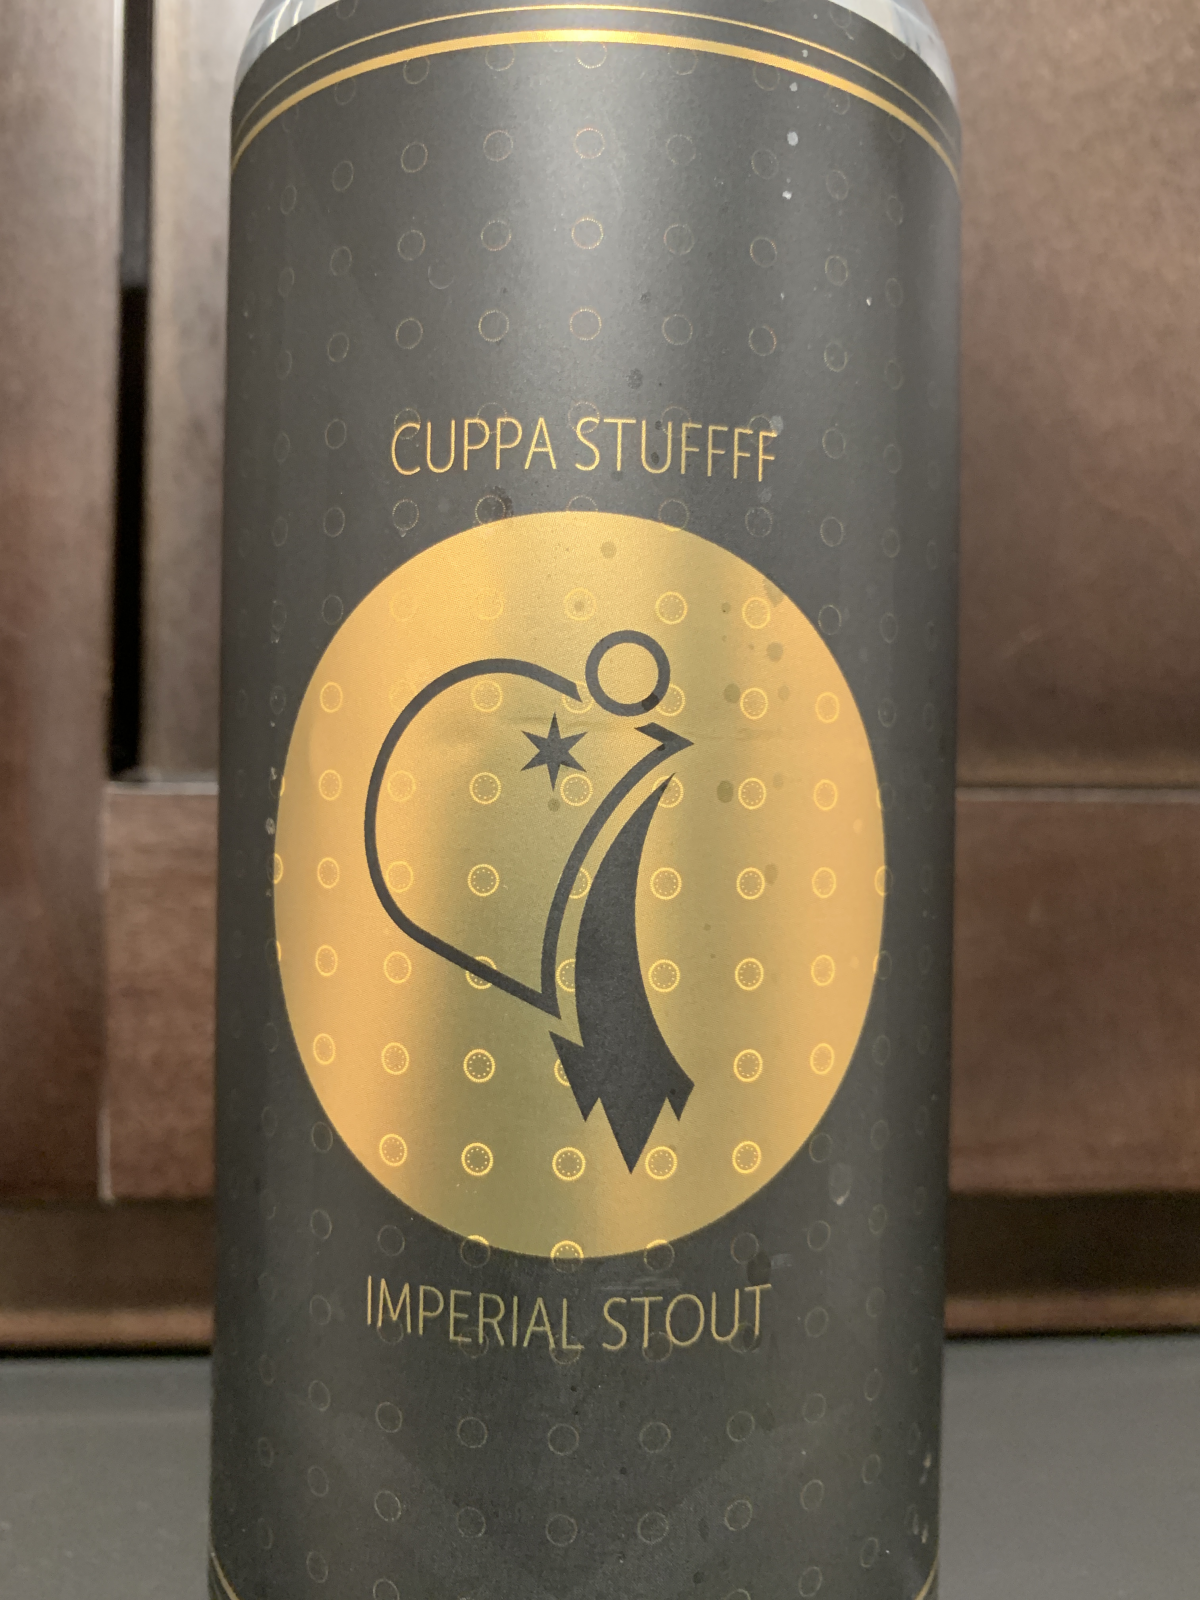 Image result for cuppa stuffff beer maplewood